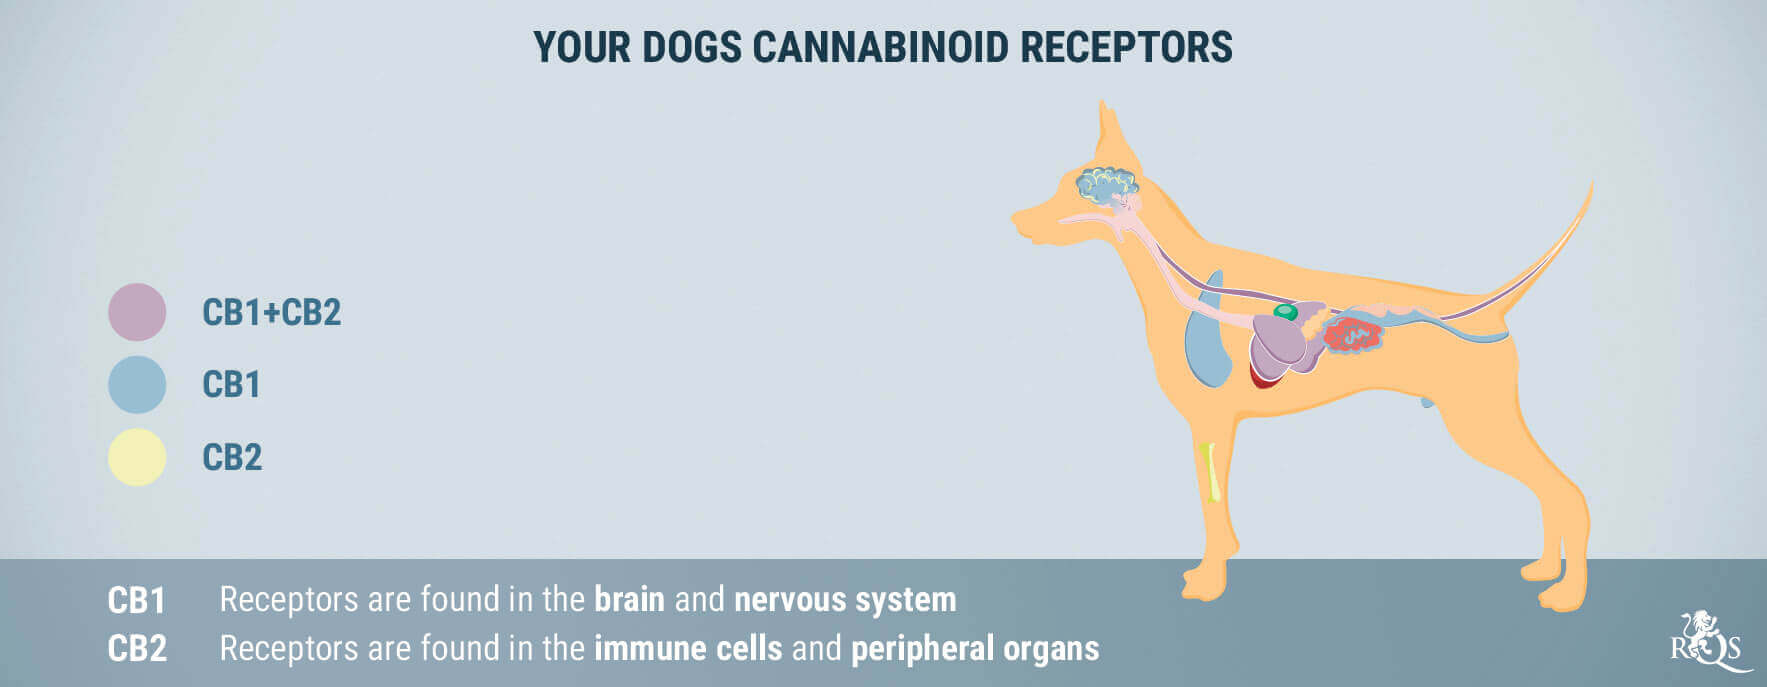 Can Dogs Get High? How to Tell If Your Dog Ate Weed?